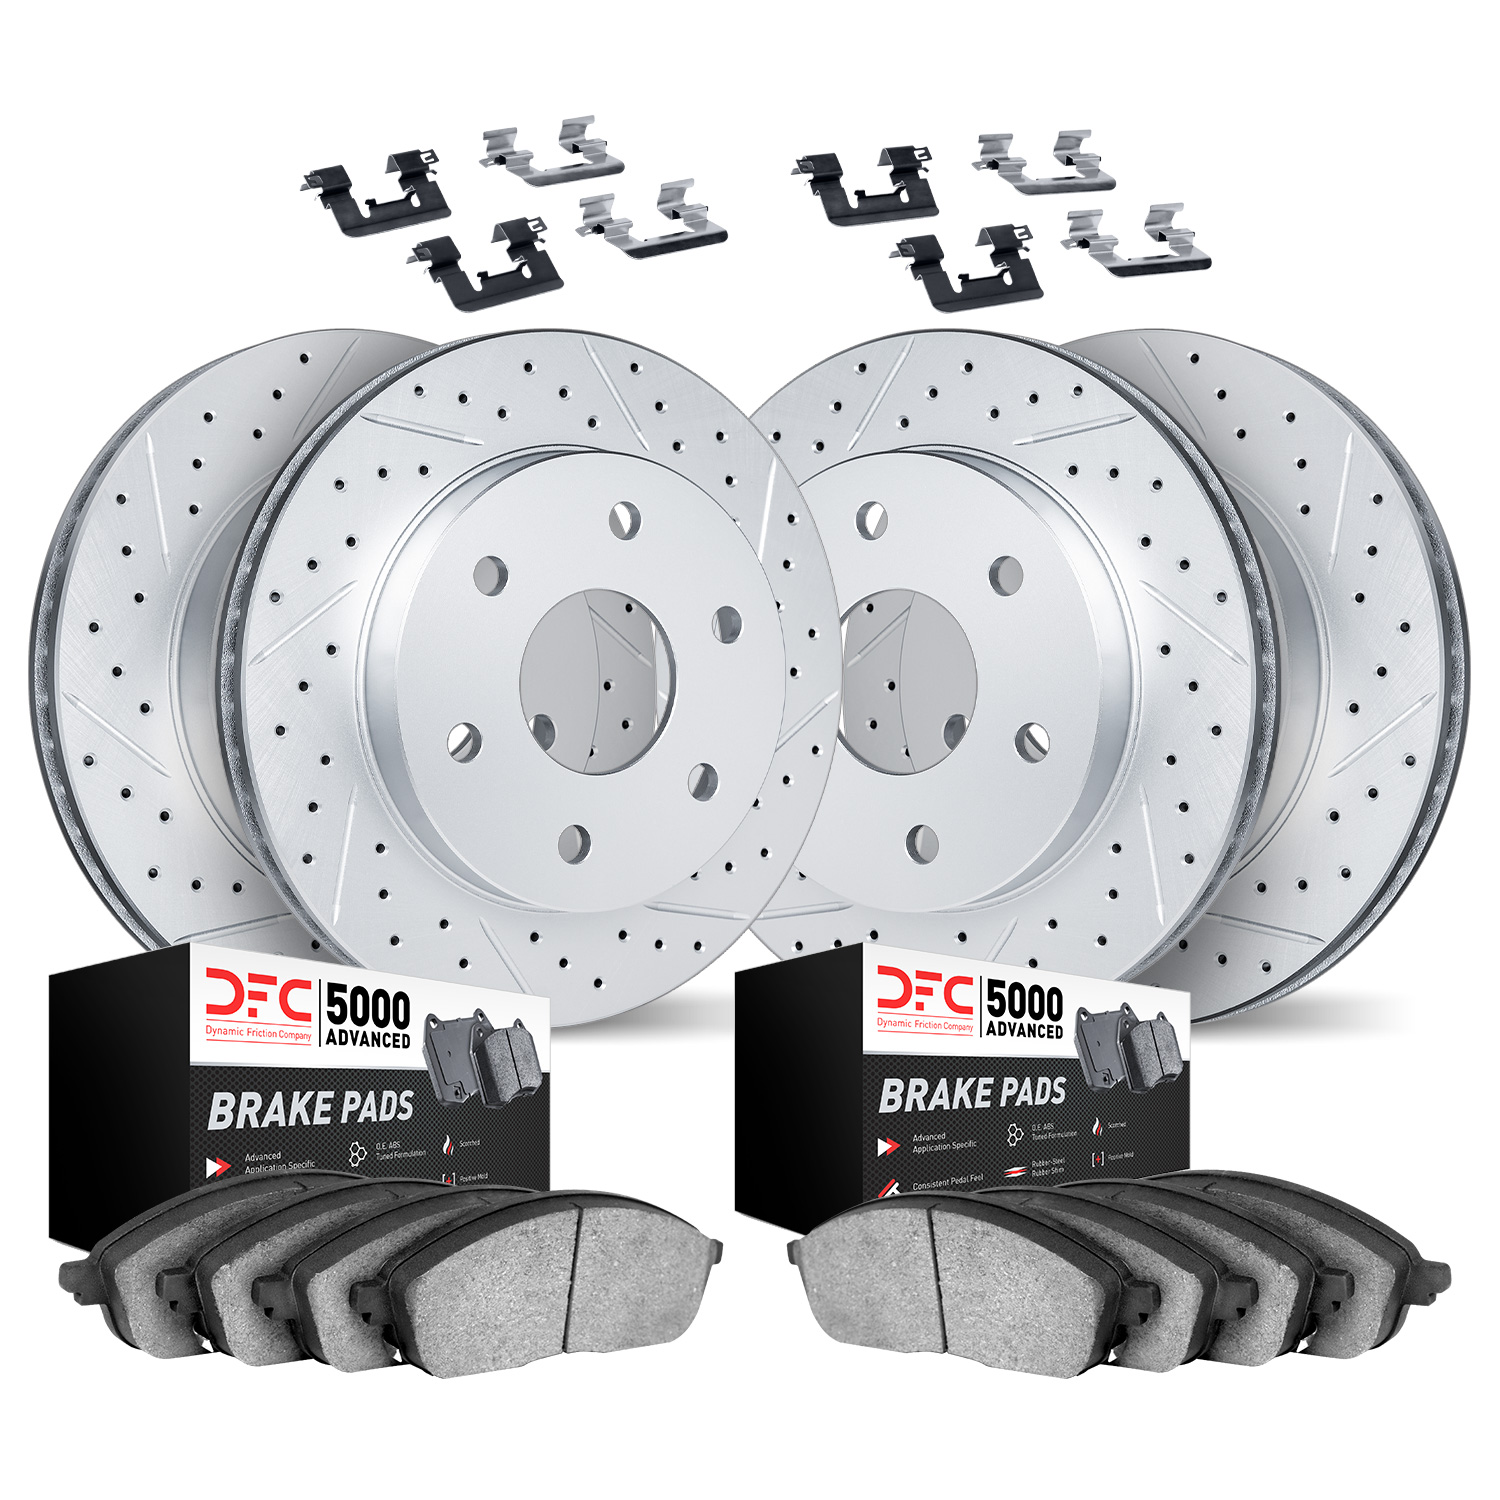 2514-54276 Geoperformance Drilled/Slotted Rotors w/5000 Advanced Brake Pads Kit & Hardware, Fits Select Ford/Lincoln/Mercury/Maz